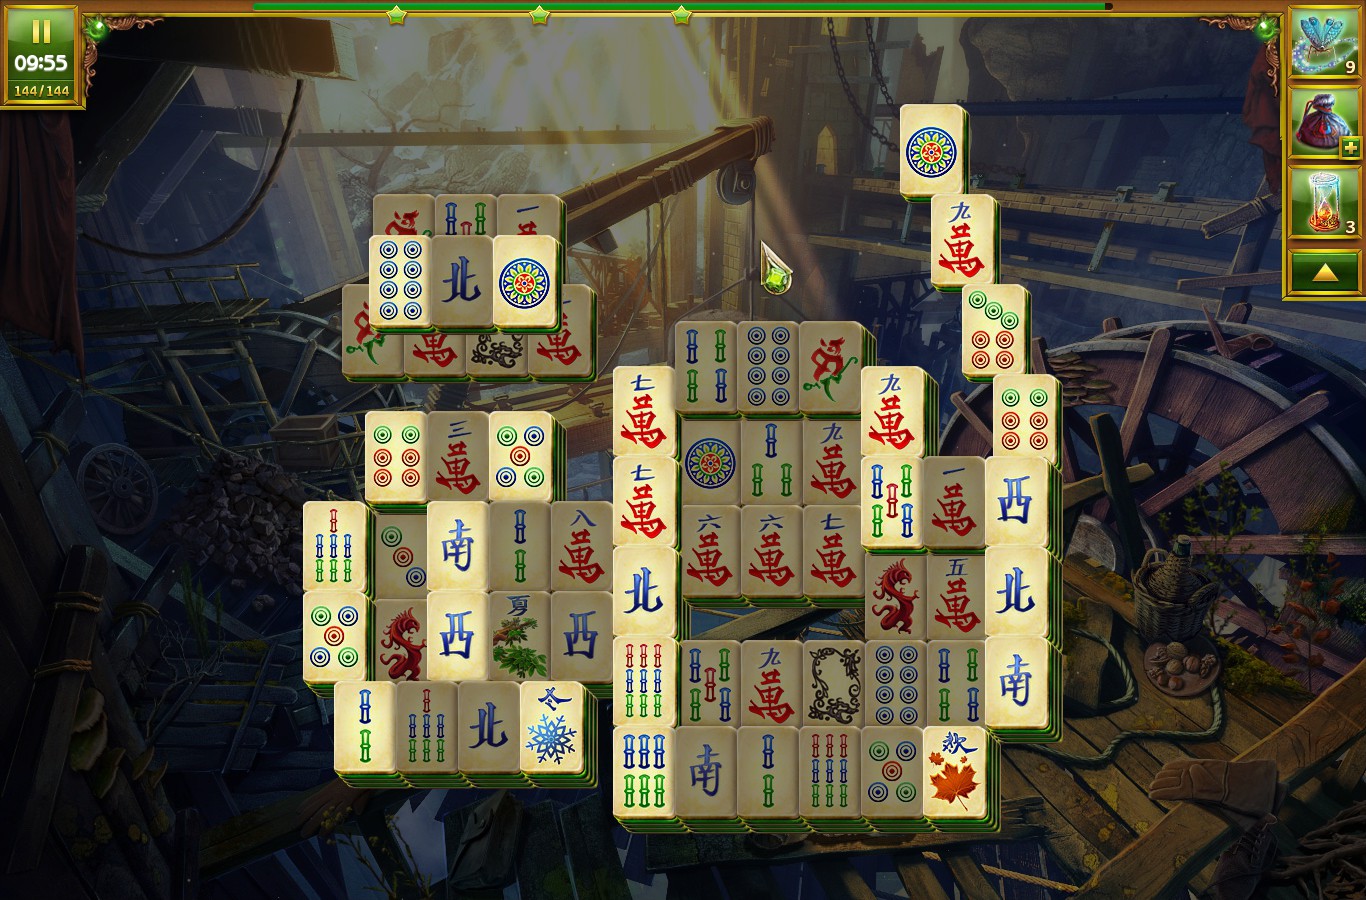 Lost Lands: Mahjong download the new for ios